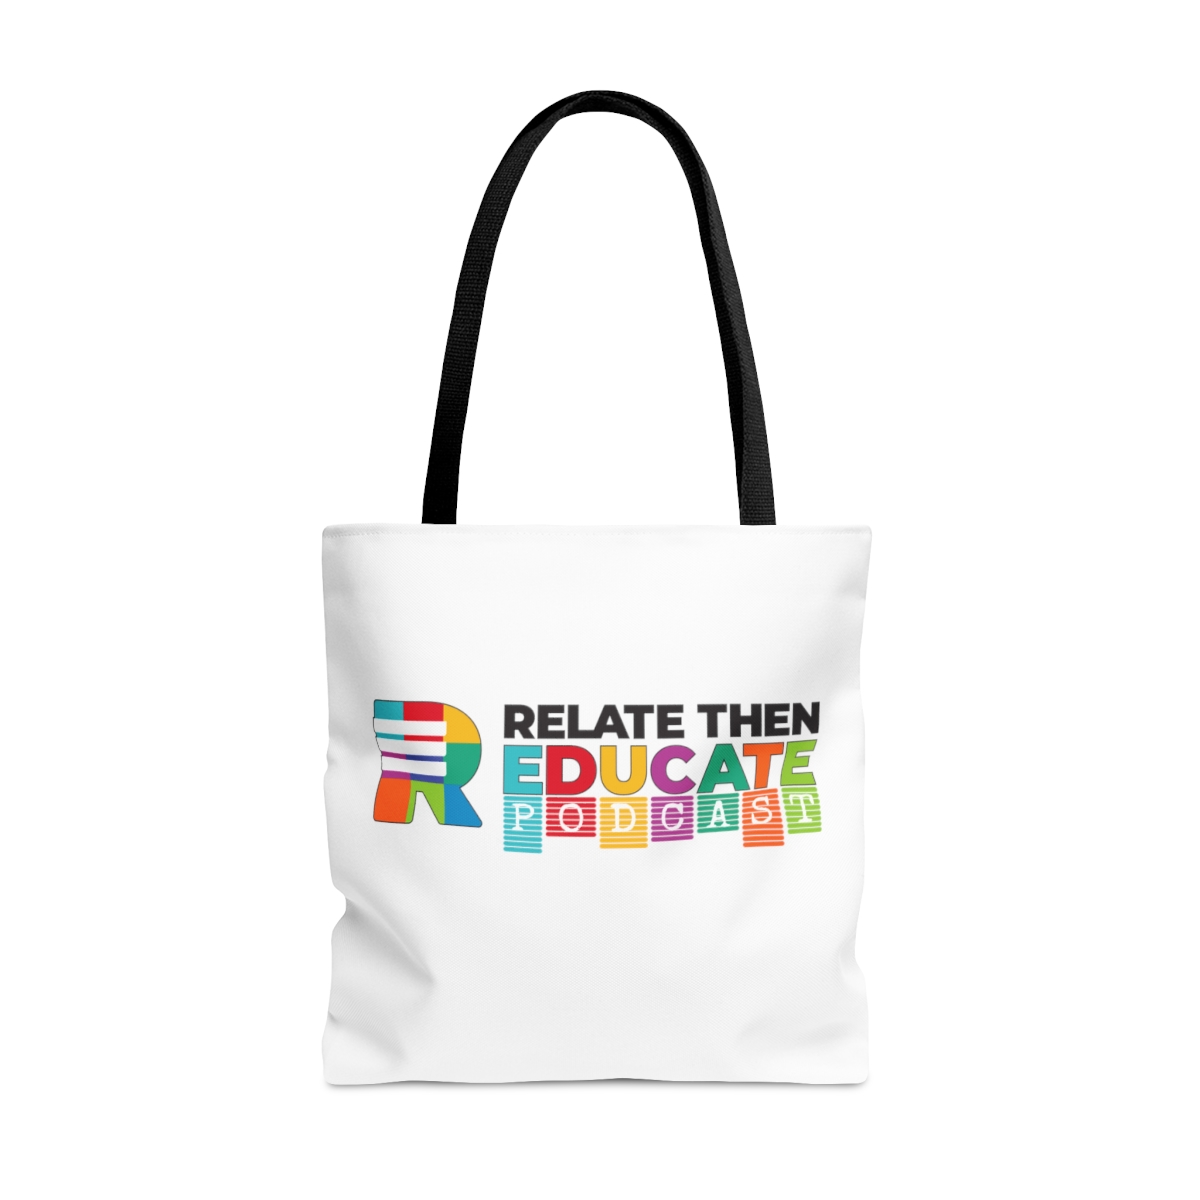 Relate Then Educate Podcast Tote Bag for Teachers product thumbnail image